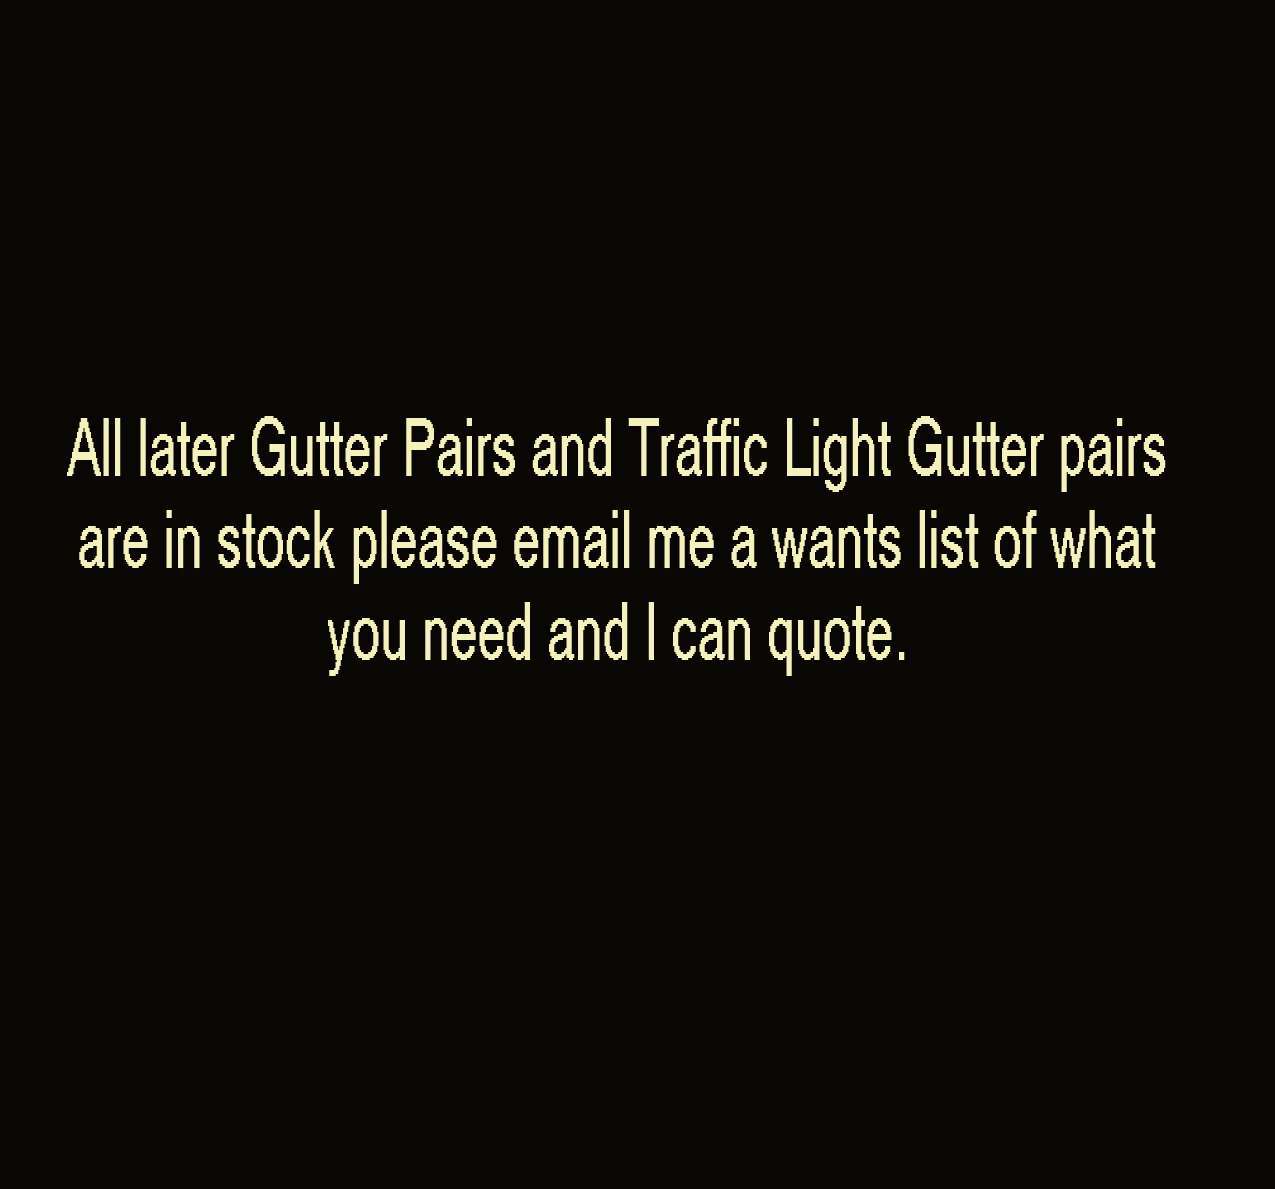 view larger back view image for All later Gutter Pairs and Traffic Light Gutter pairs are in stock please email me a wants list of what you need and I can quote.